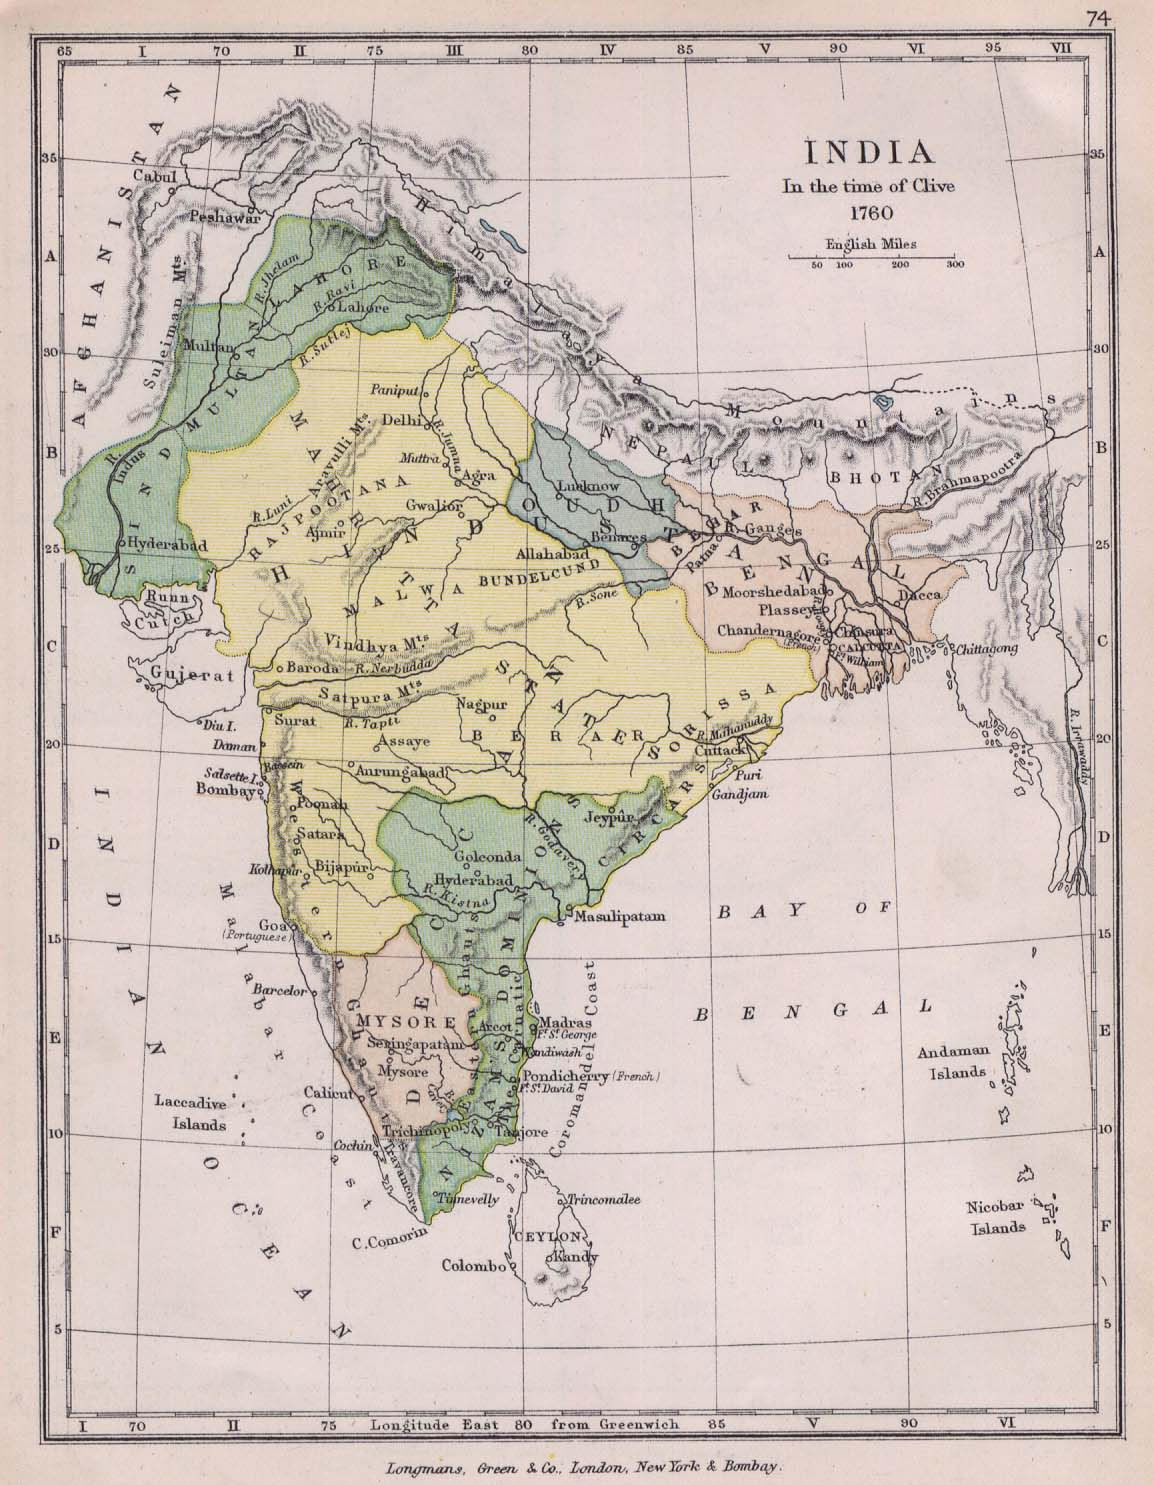 india-historical-map-1760-from-The-Public-Schools-Historical-Atlas